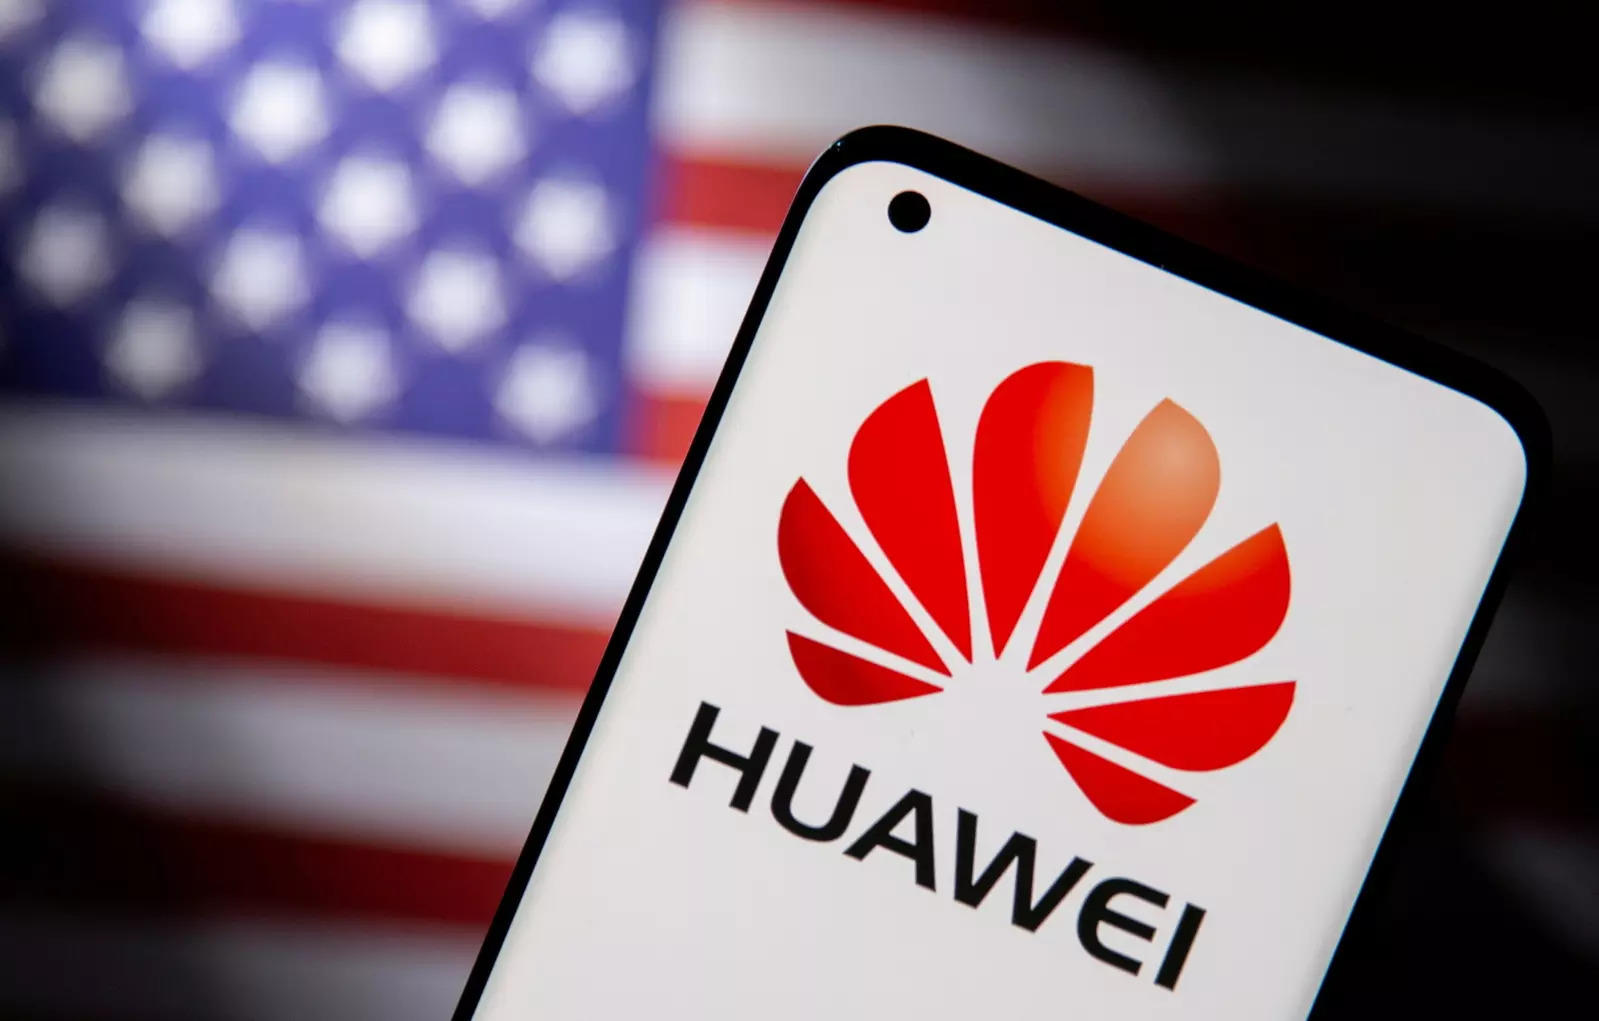 Huawei, SMIC suppliers received billions worth of licenses for U.S. goods: Documents